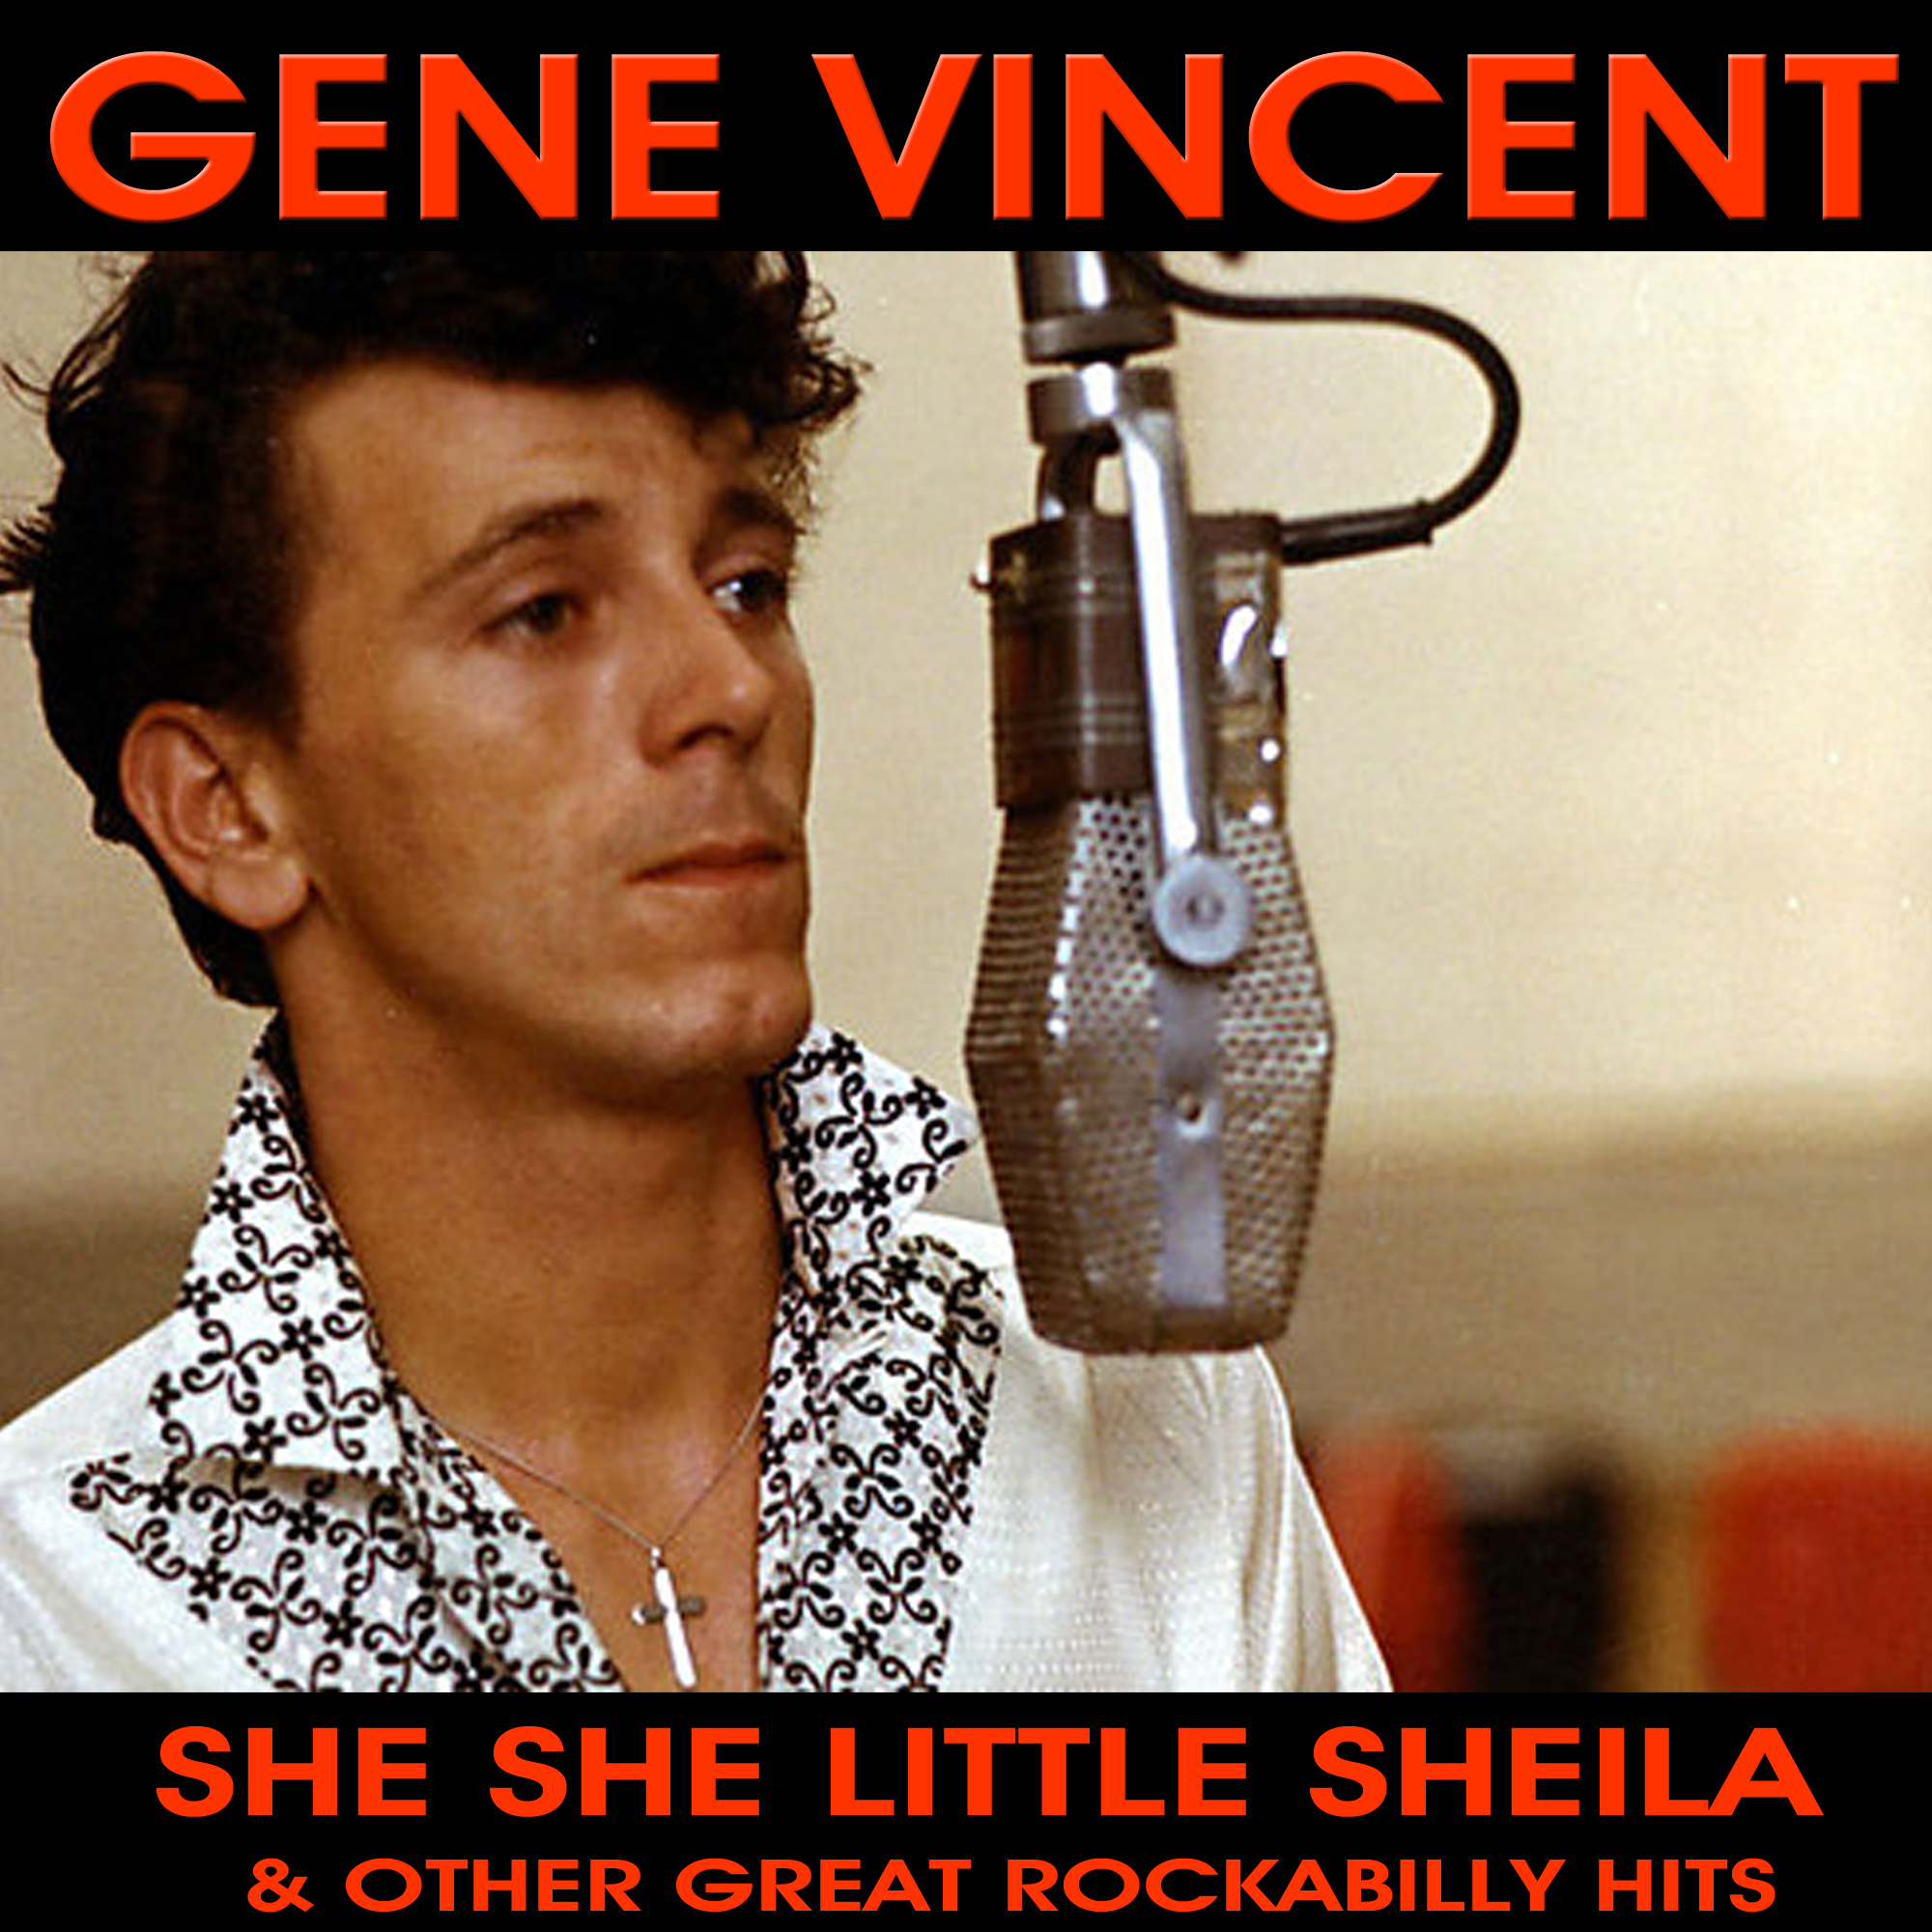 She She Little Sheila and Other Great Rockabilly Hits